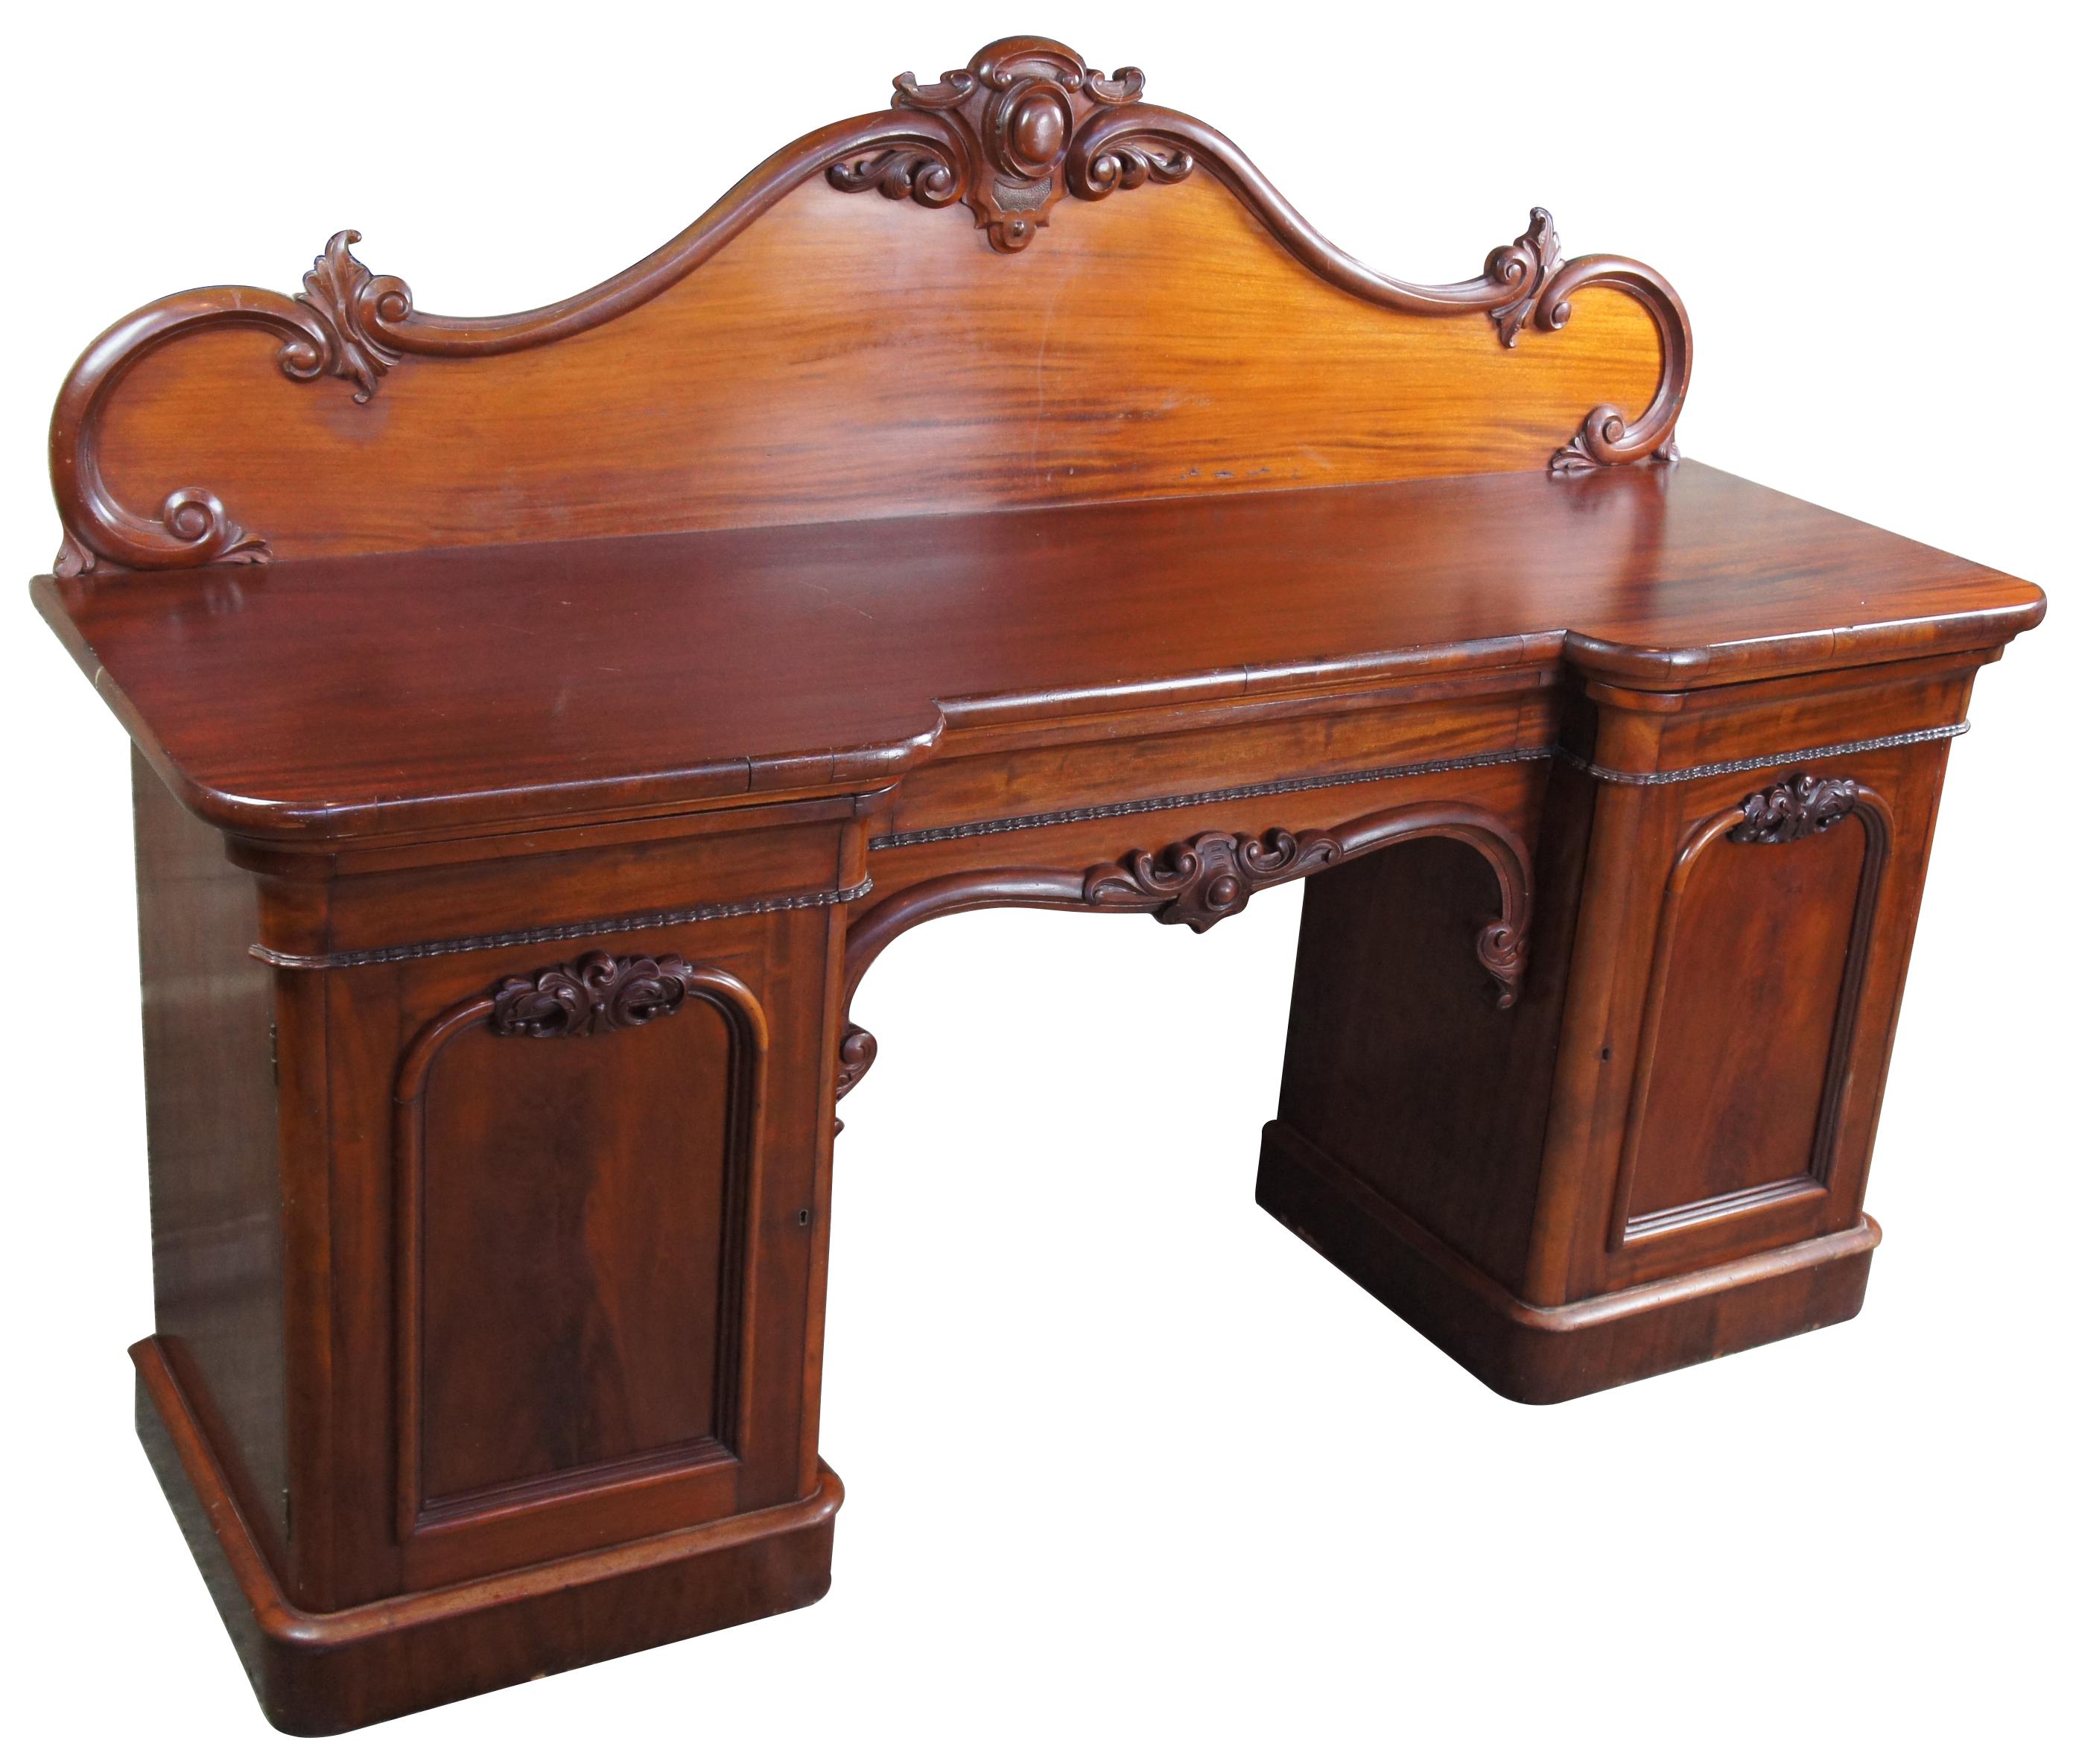 Solid mahogany monumental English sideboard or breakfront with flame mahogany veneers, circa 1820s. Features a large serpentine carved backsplash and a long central drawer flanked by outer cabinets. Could also be used as a console, buffet, credenza